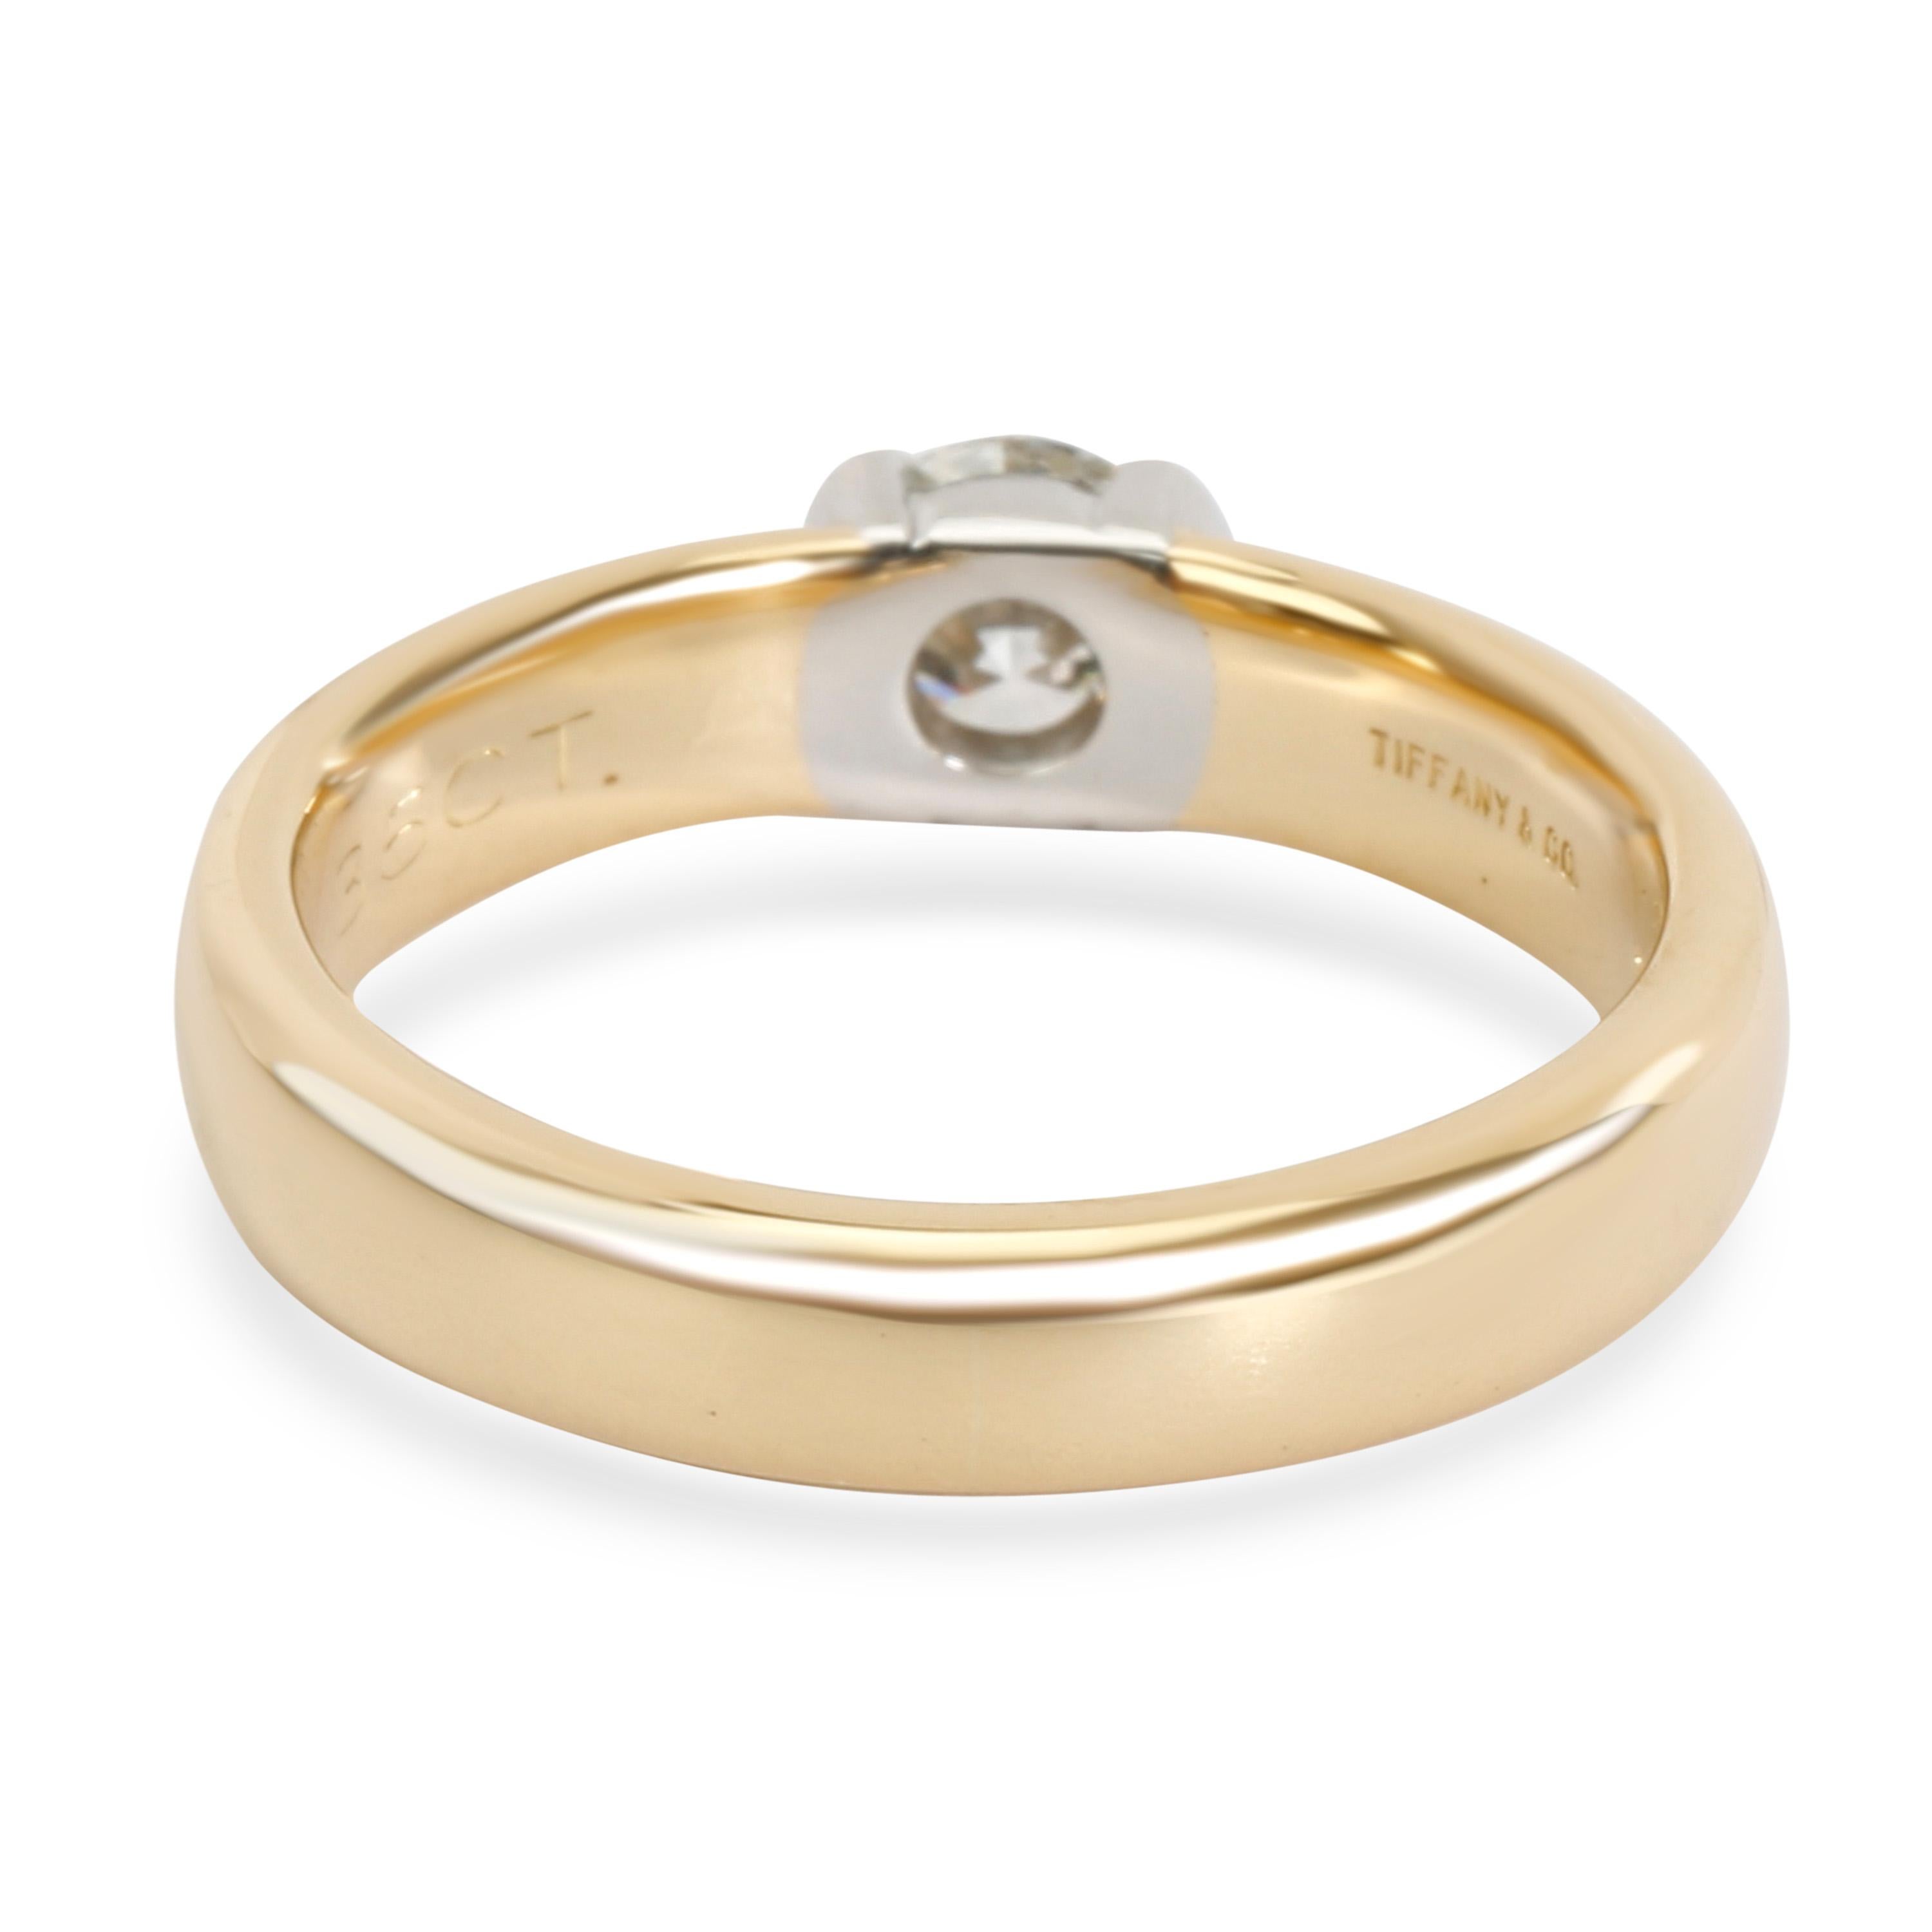 Tiffany & Co. Semi Bezel Diamond Engagement Ring in 18K 2 Tone Gold 0.35 CTW

PRIMARY DETAILS
SKU: 100496
Listing Title: Tiffany & Co. Semi Bezel Diamond Engagement Ring in 18K 2 Tone Gold 0.35 CTW
Condition Description: Retails for 2945 USD. In